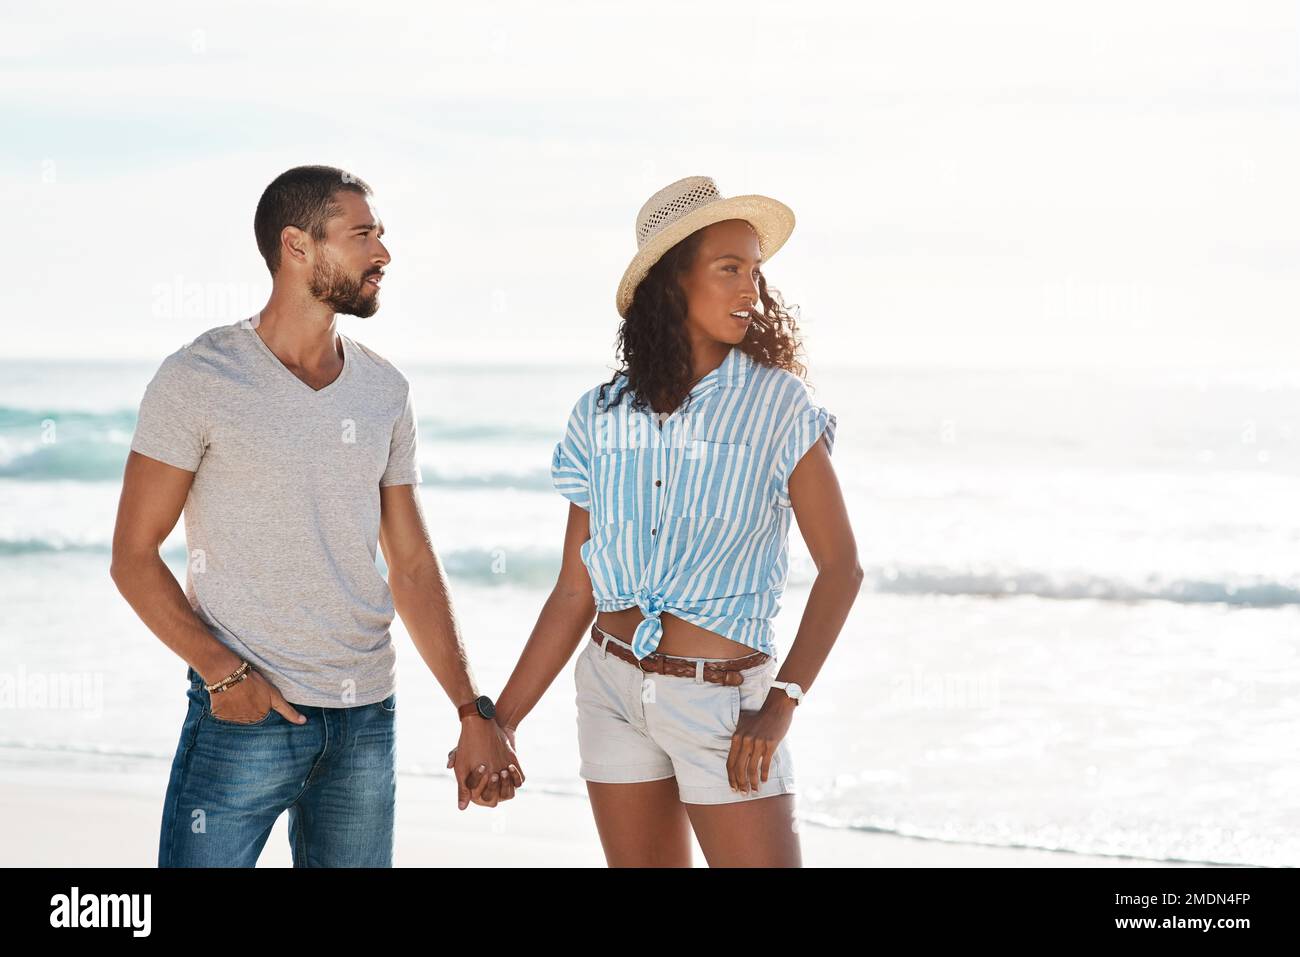 Who knows what our journey in love will lead to. a young couple enjoying some quality time together at the beach. Stock Photo